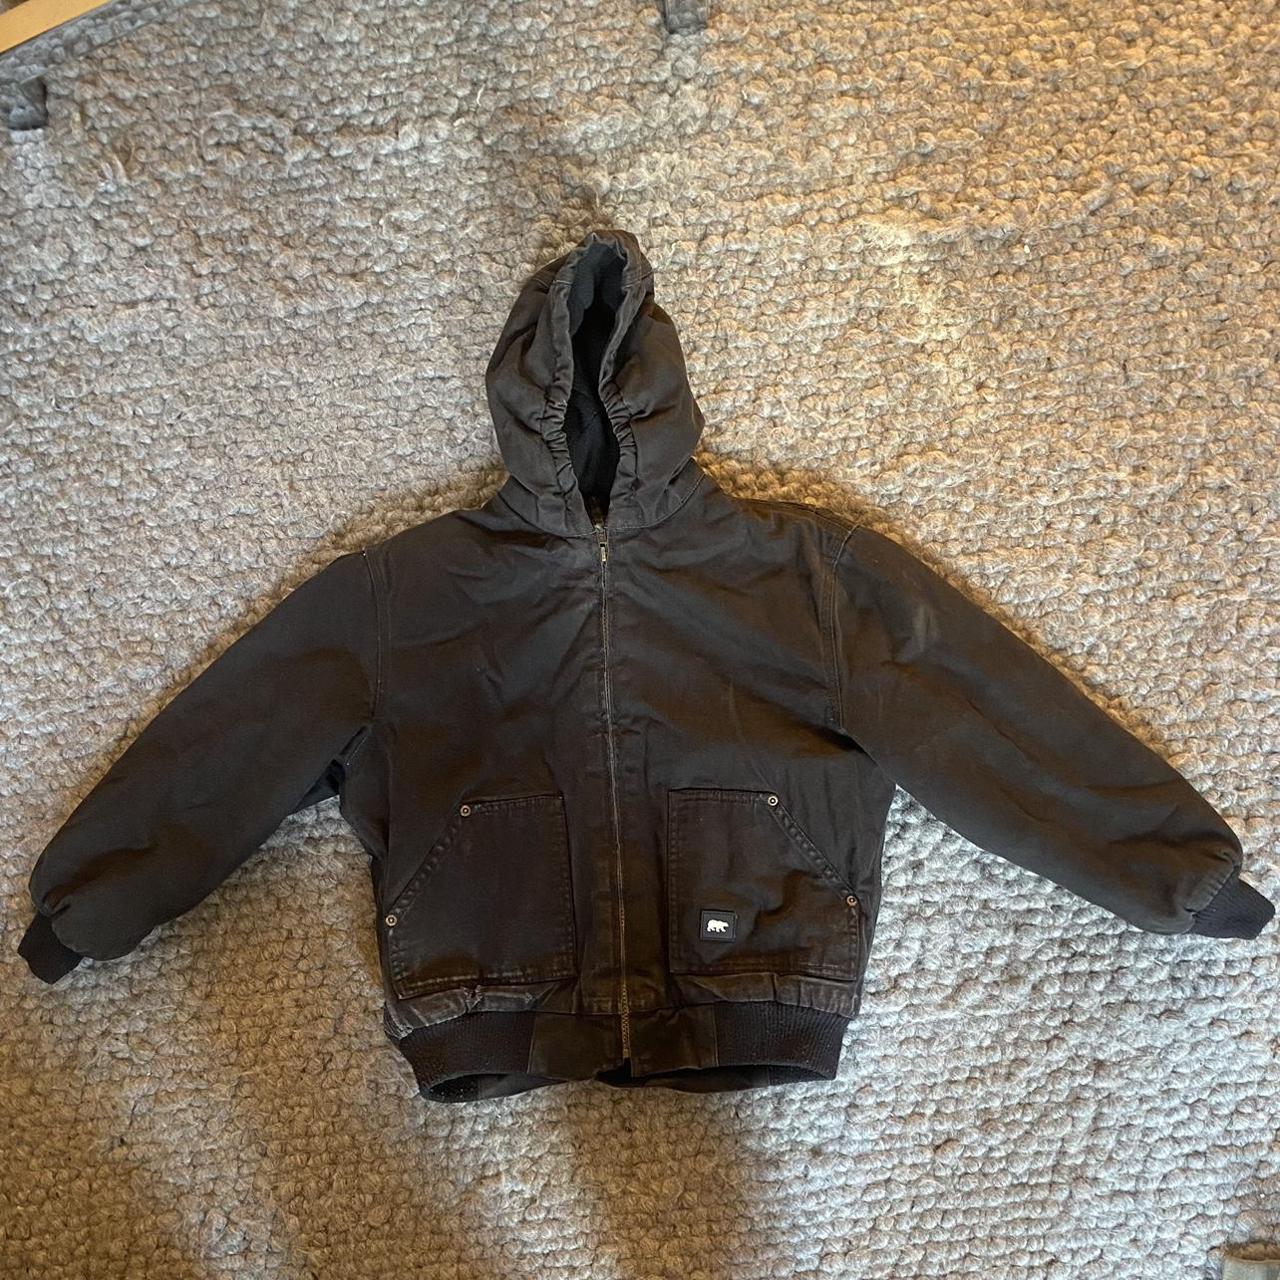 Polar king kids size small jacket would fit a 6-11... - Depop